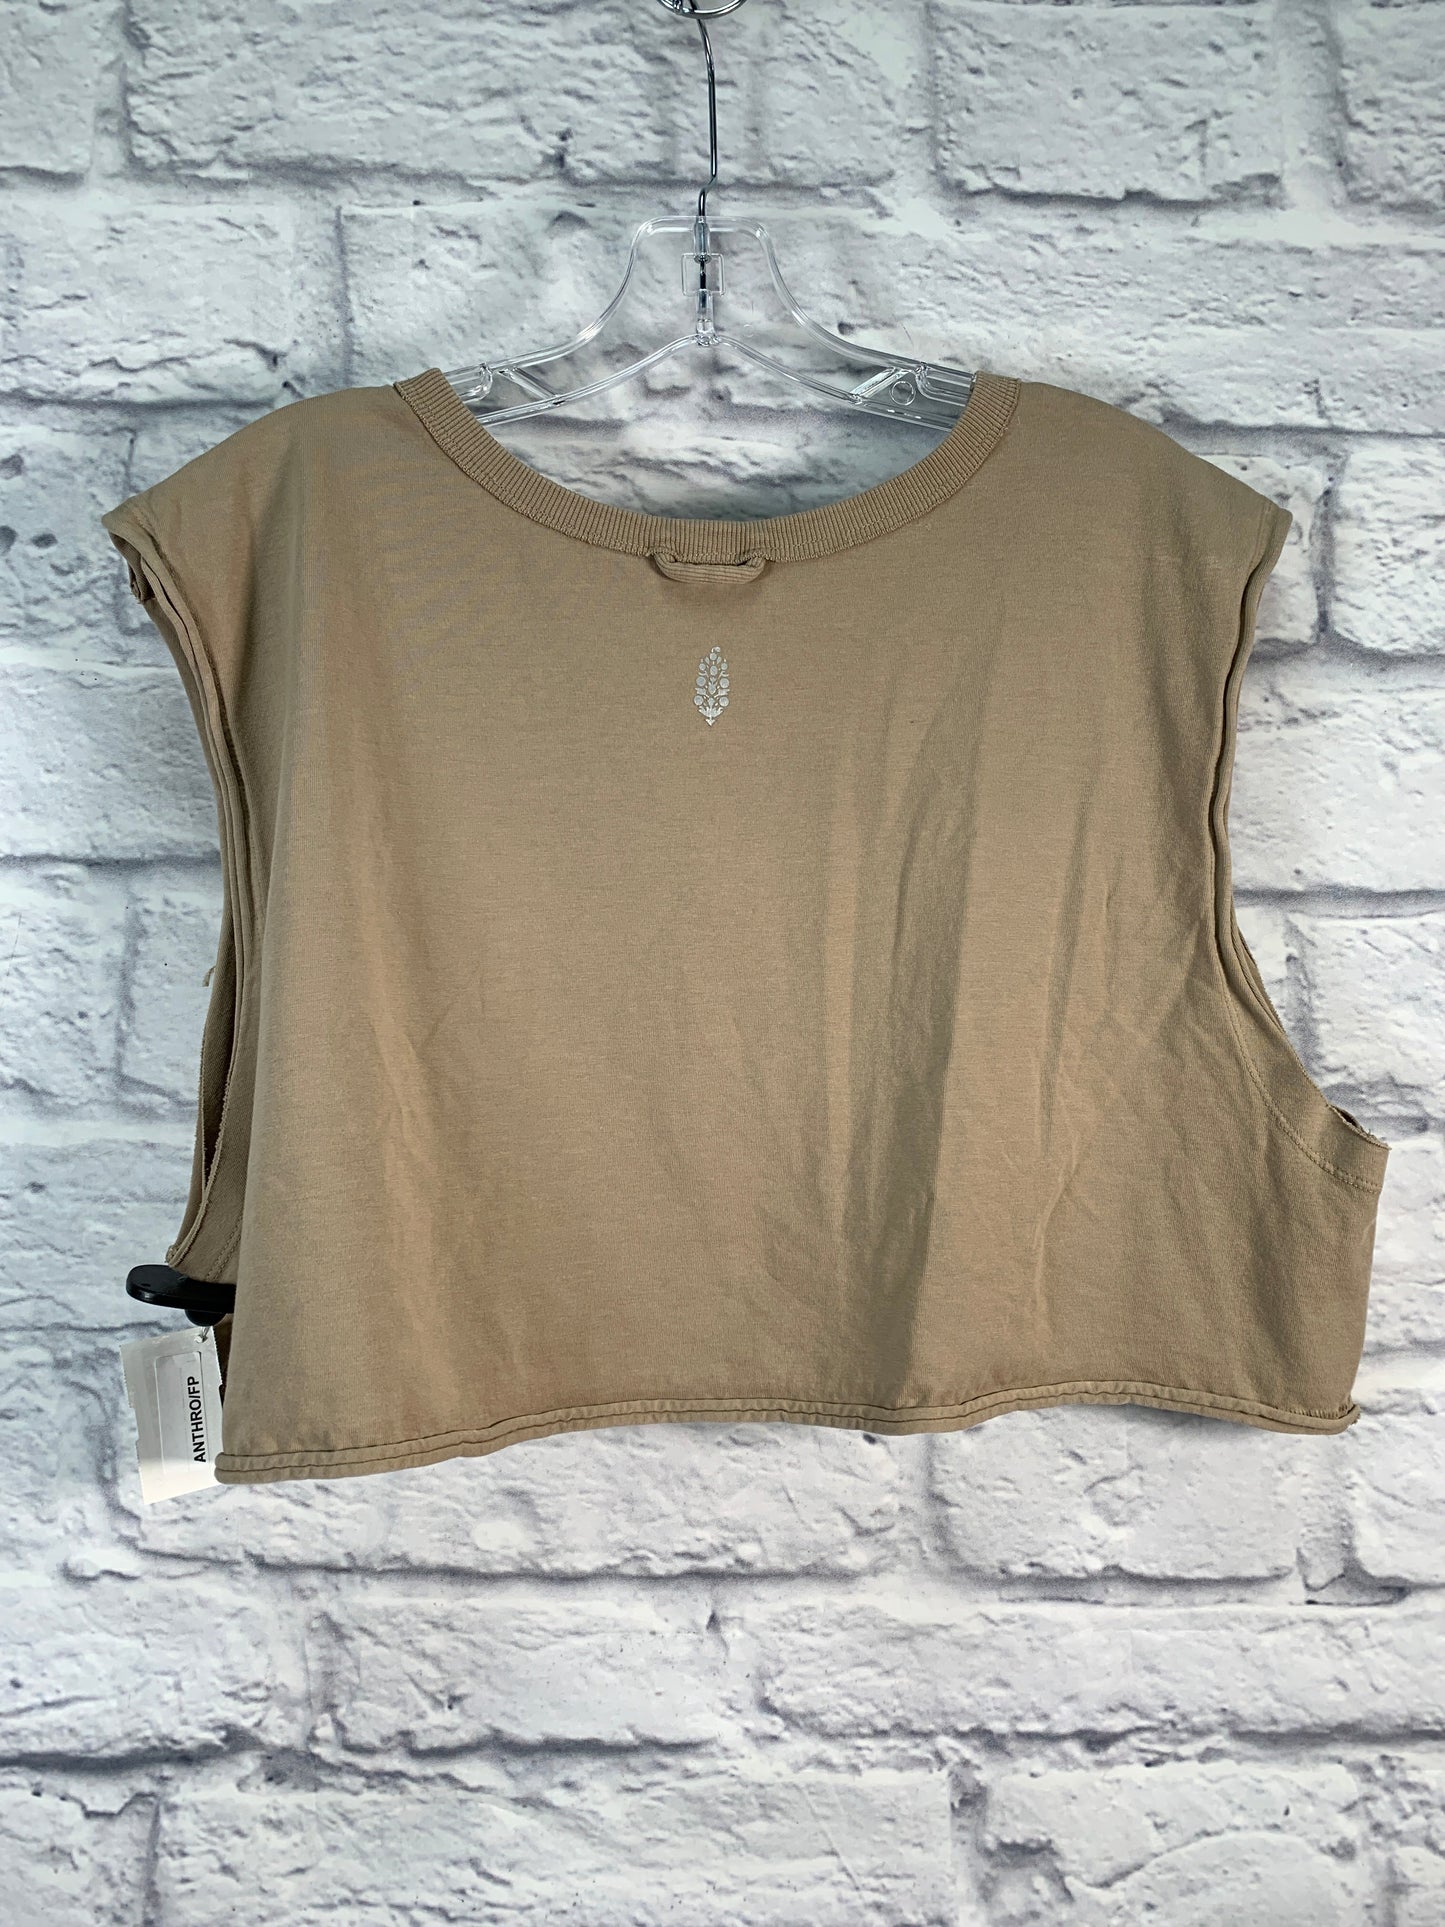 Brown Athletic Tank Top Free People, Size L